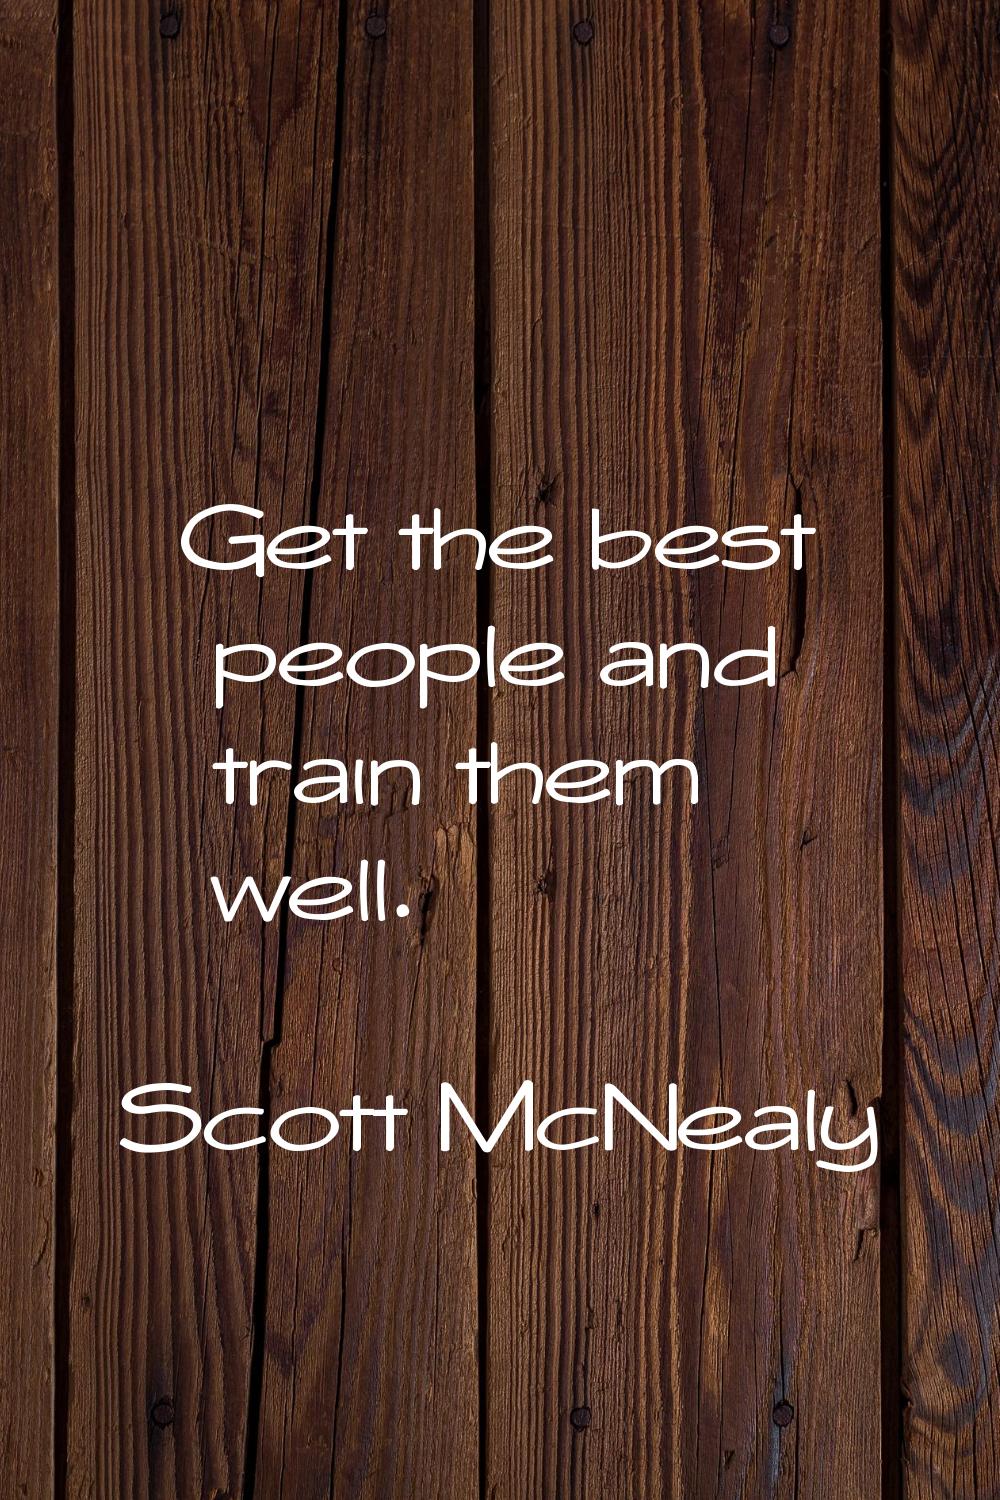 Get the best people and train them well.